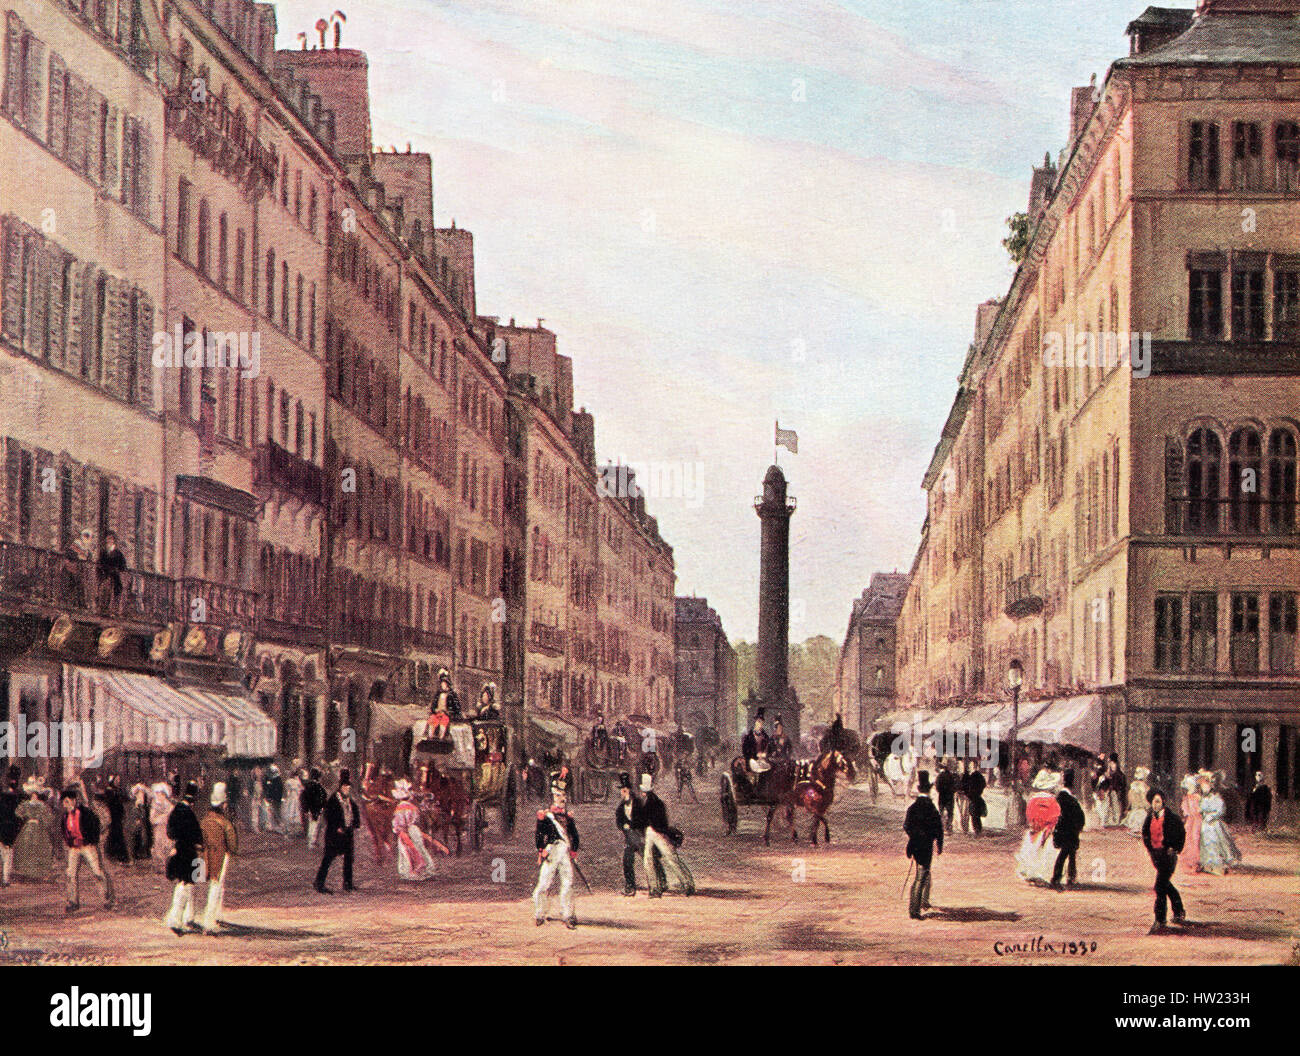 La Rue de la Paix, with the Memorial column at Place Vendome in the background, Paris, France in the 19th century.  After the painting by J. Canella. Stock Photo